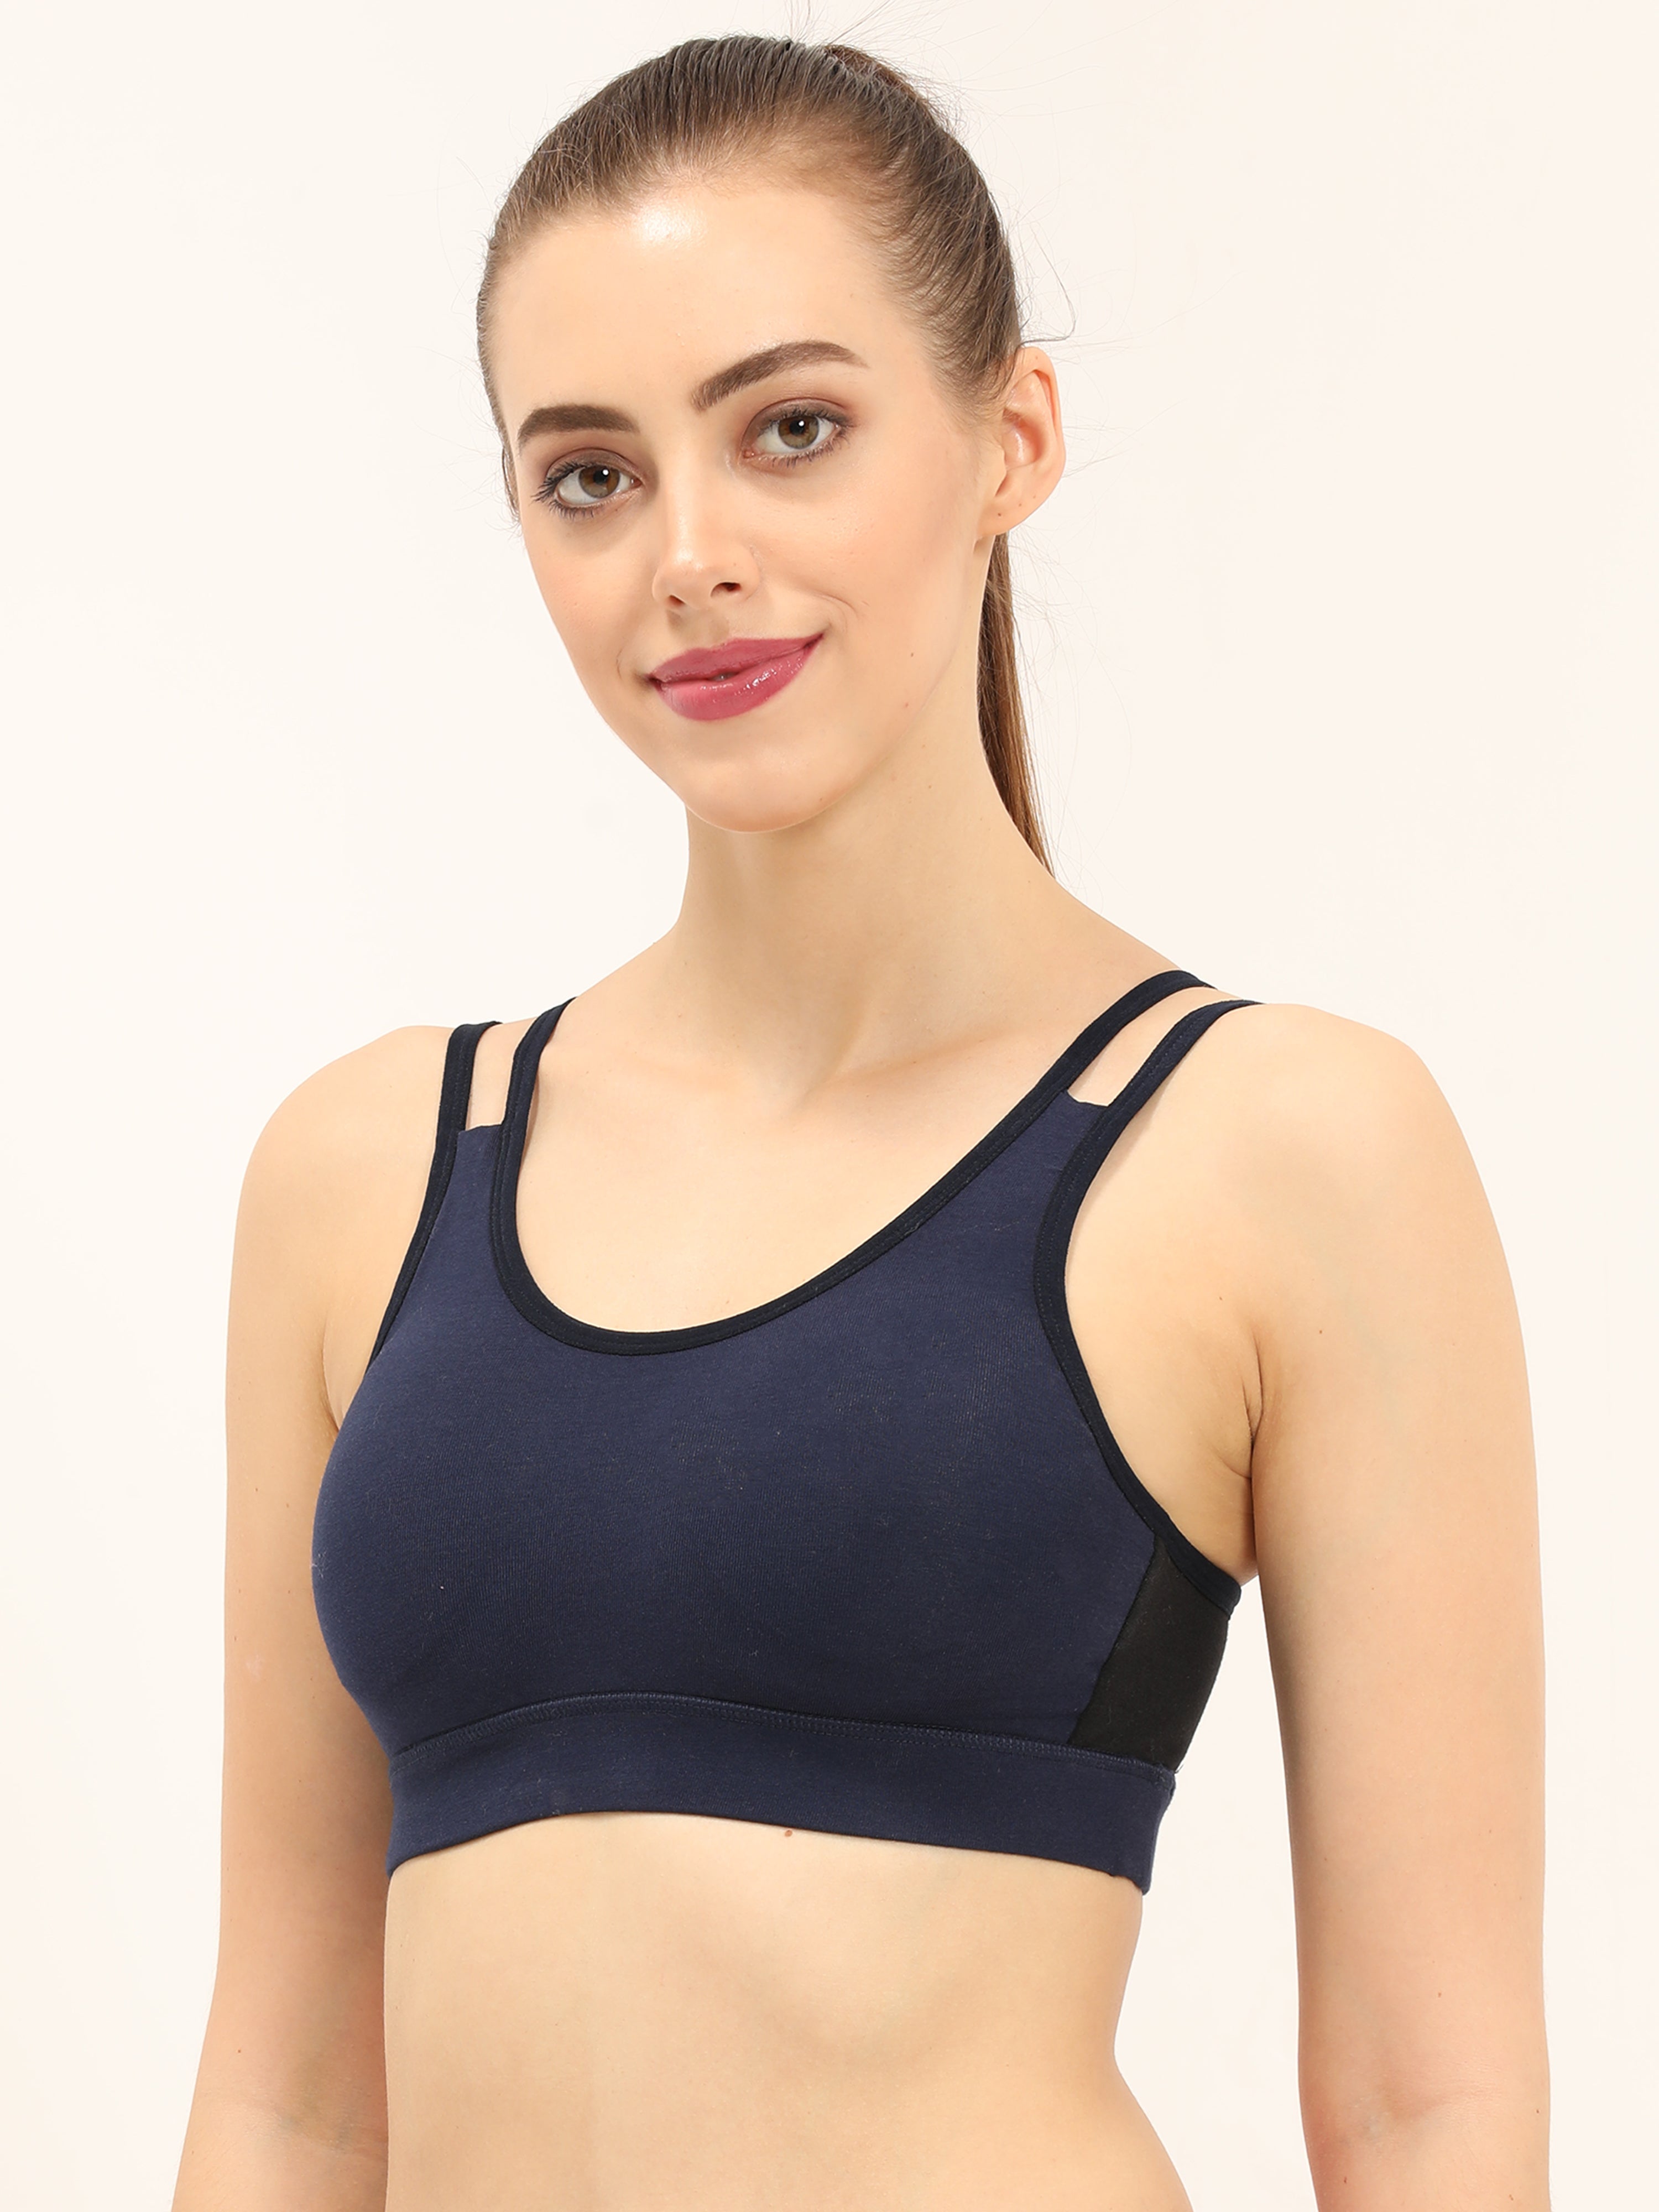  S-5XL 3pcs/Set Sexy Active Bra with Removable Pad